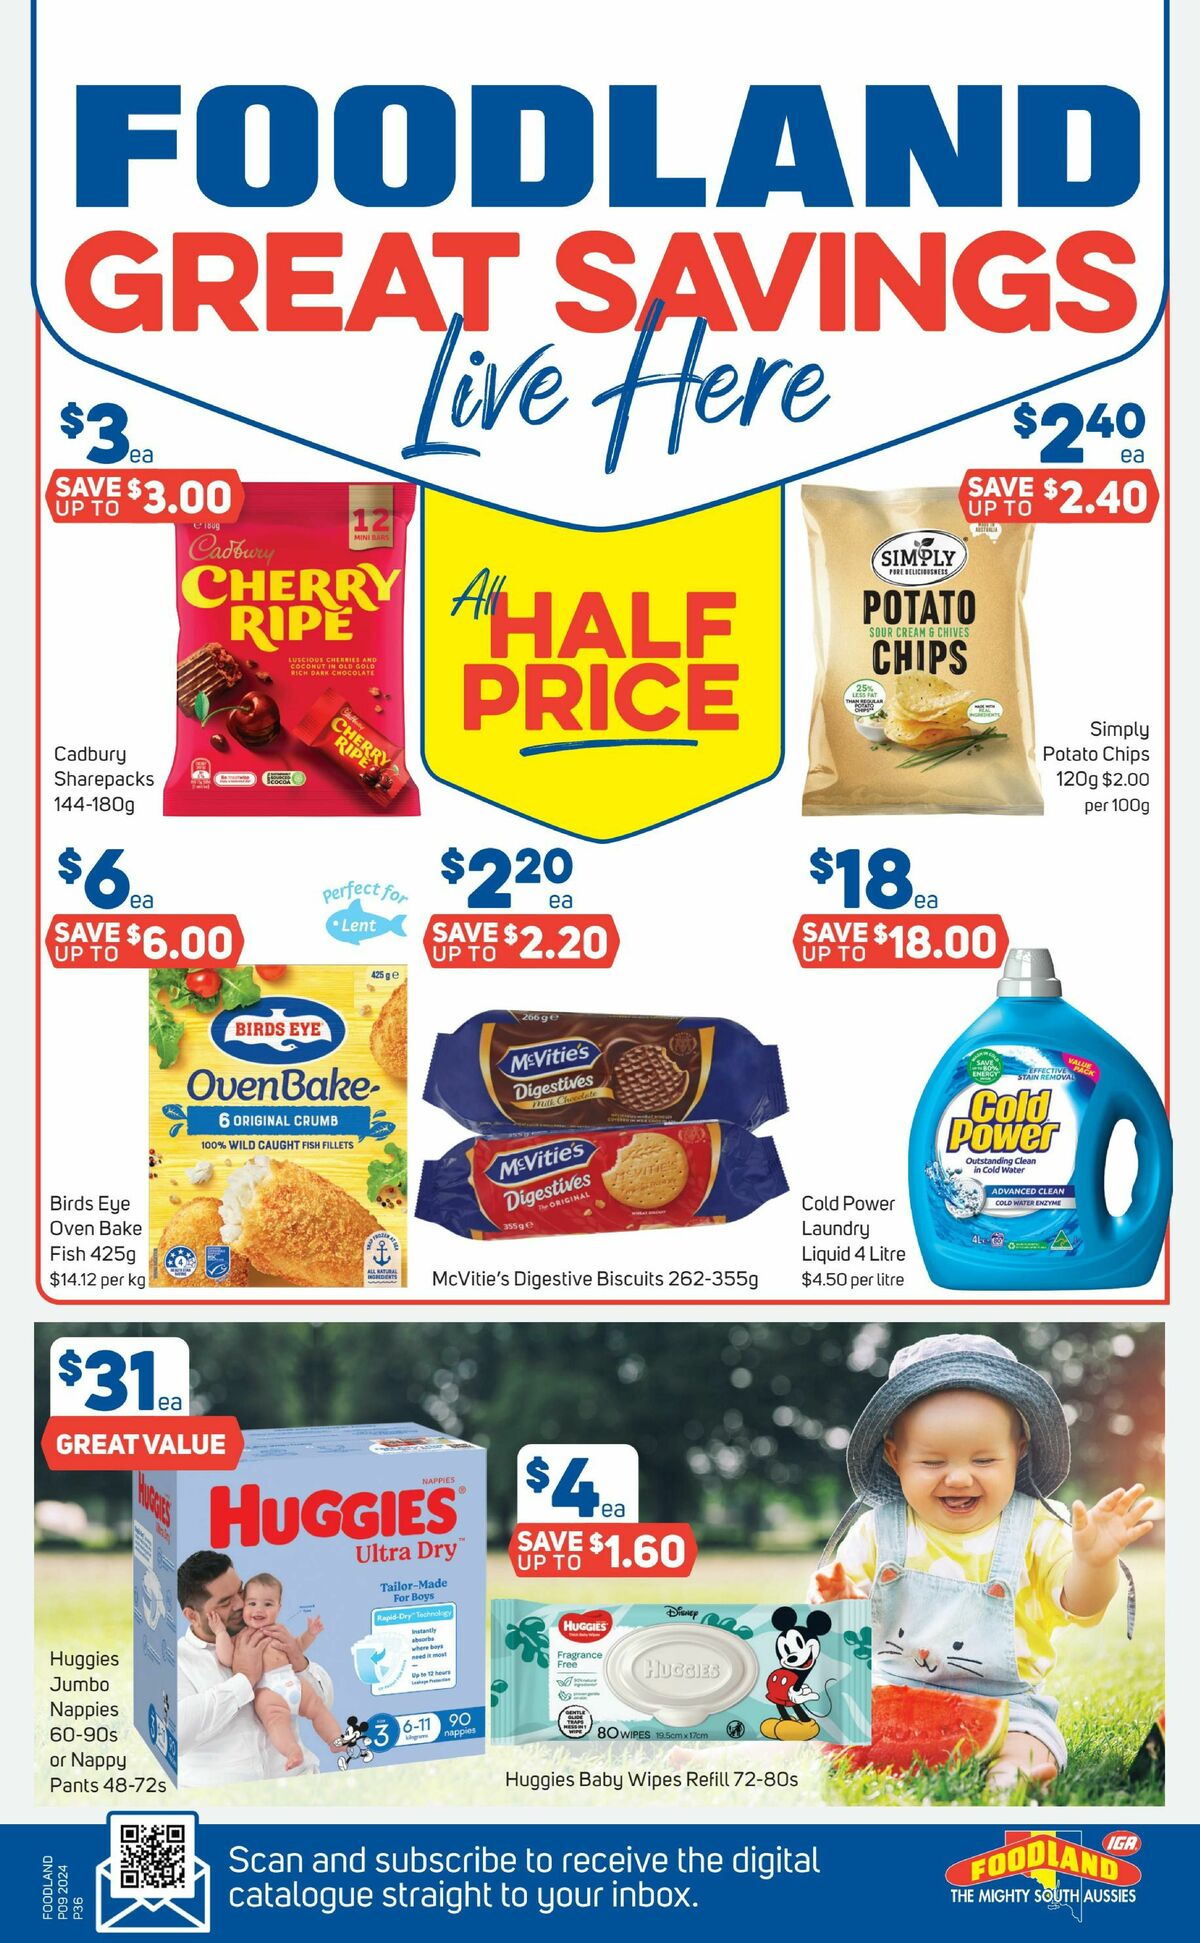 Foodland Catalogues from 28 February